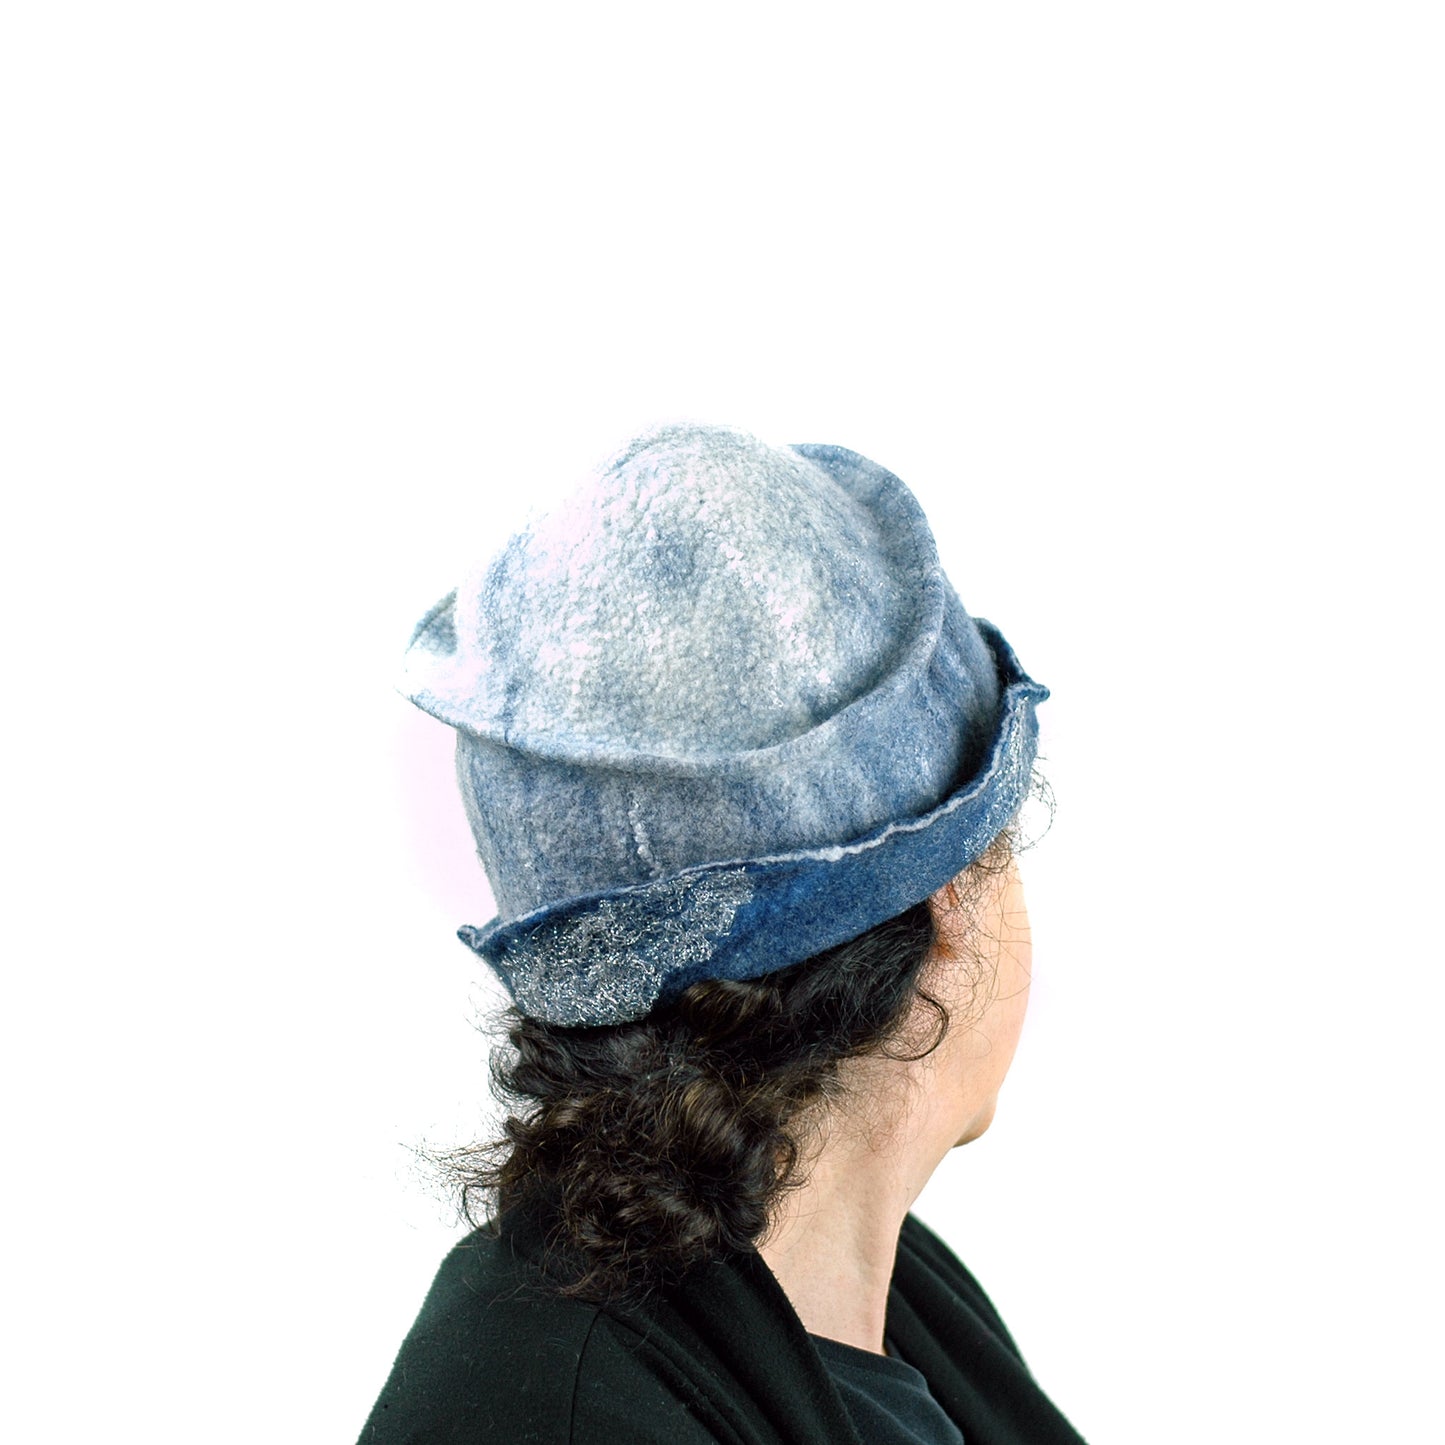 Indigo and White Felted Cloche Hat made with Superfine Merino Wool and Silver Lace - back view